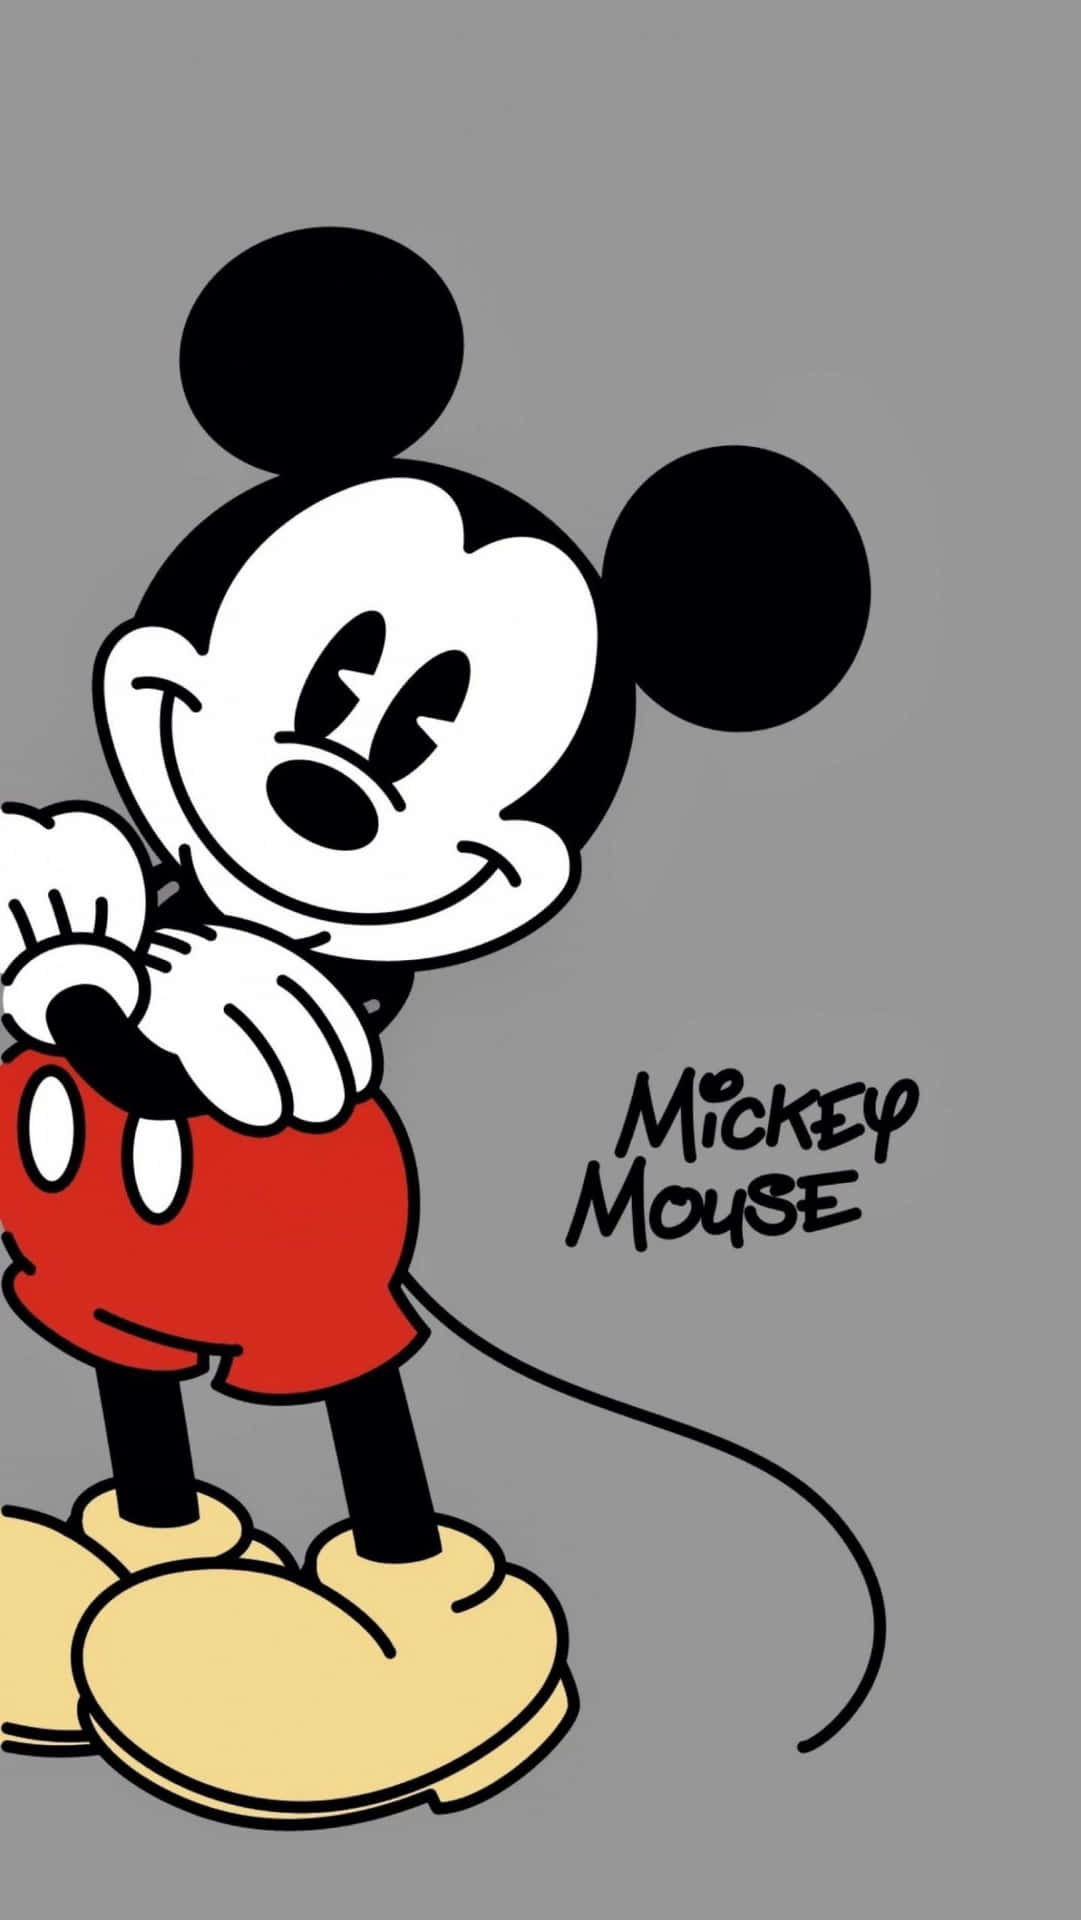 Mickey Mouse looking cool and fashionably dressed Wallpaper